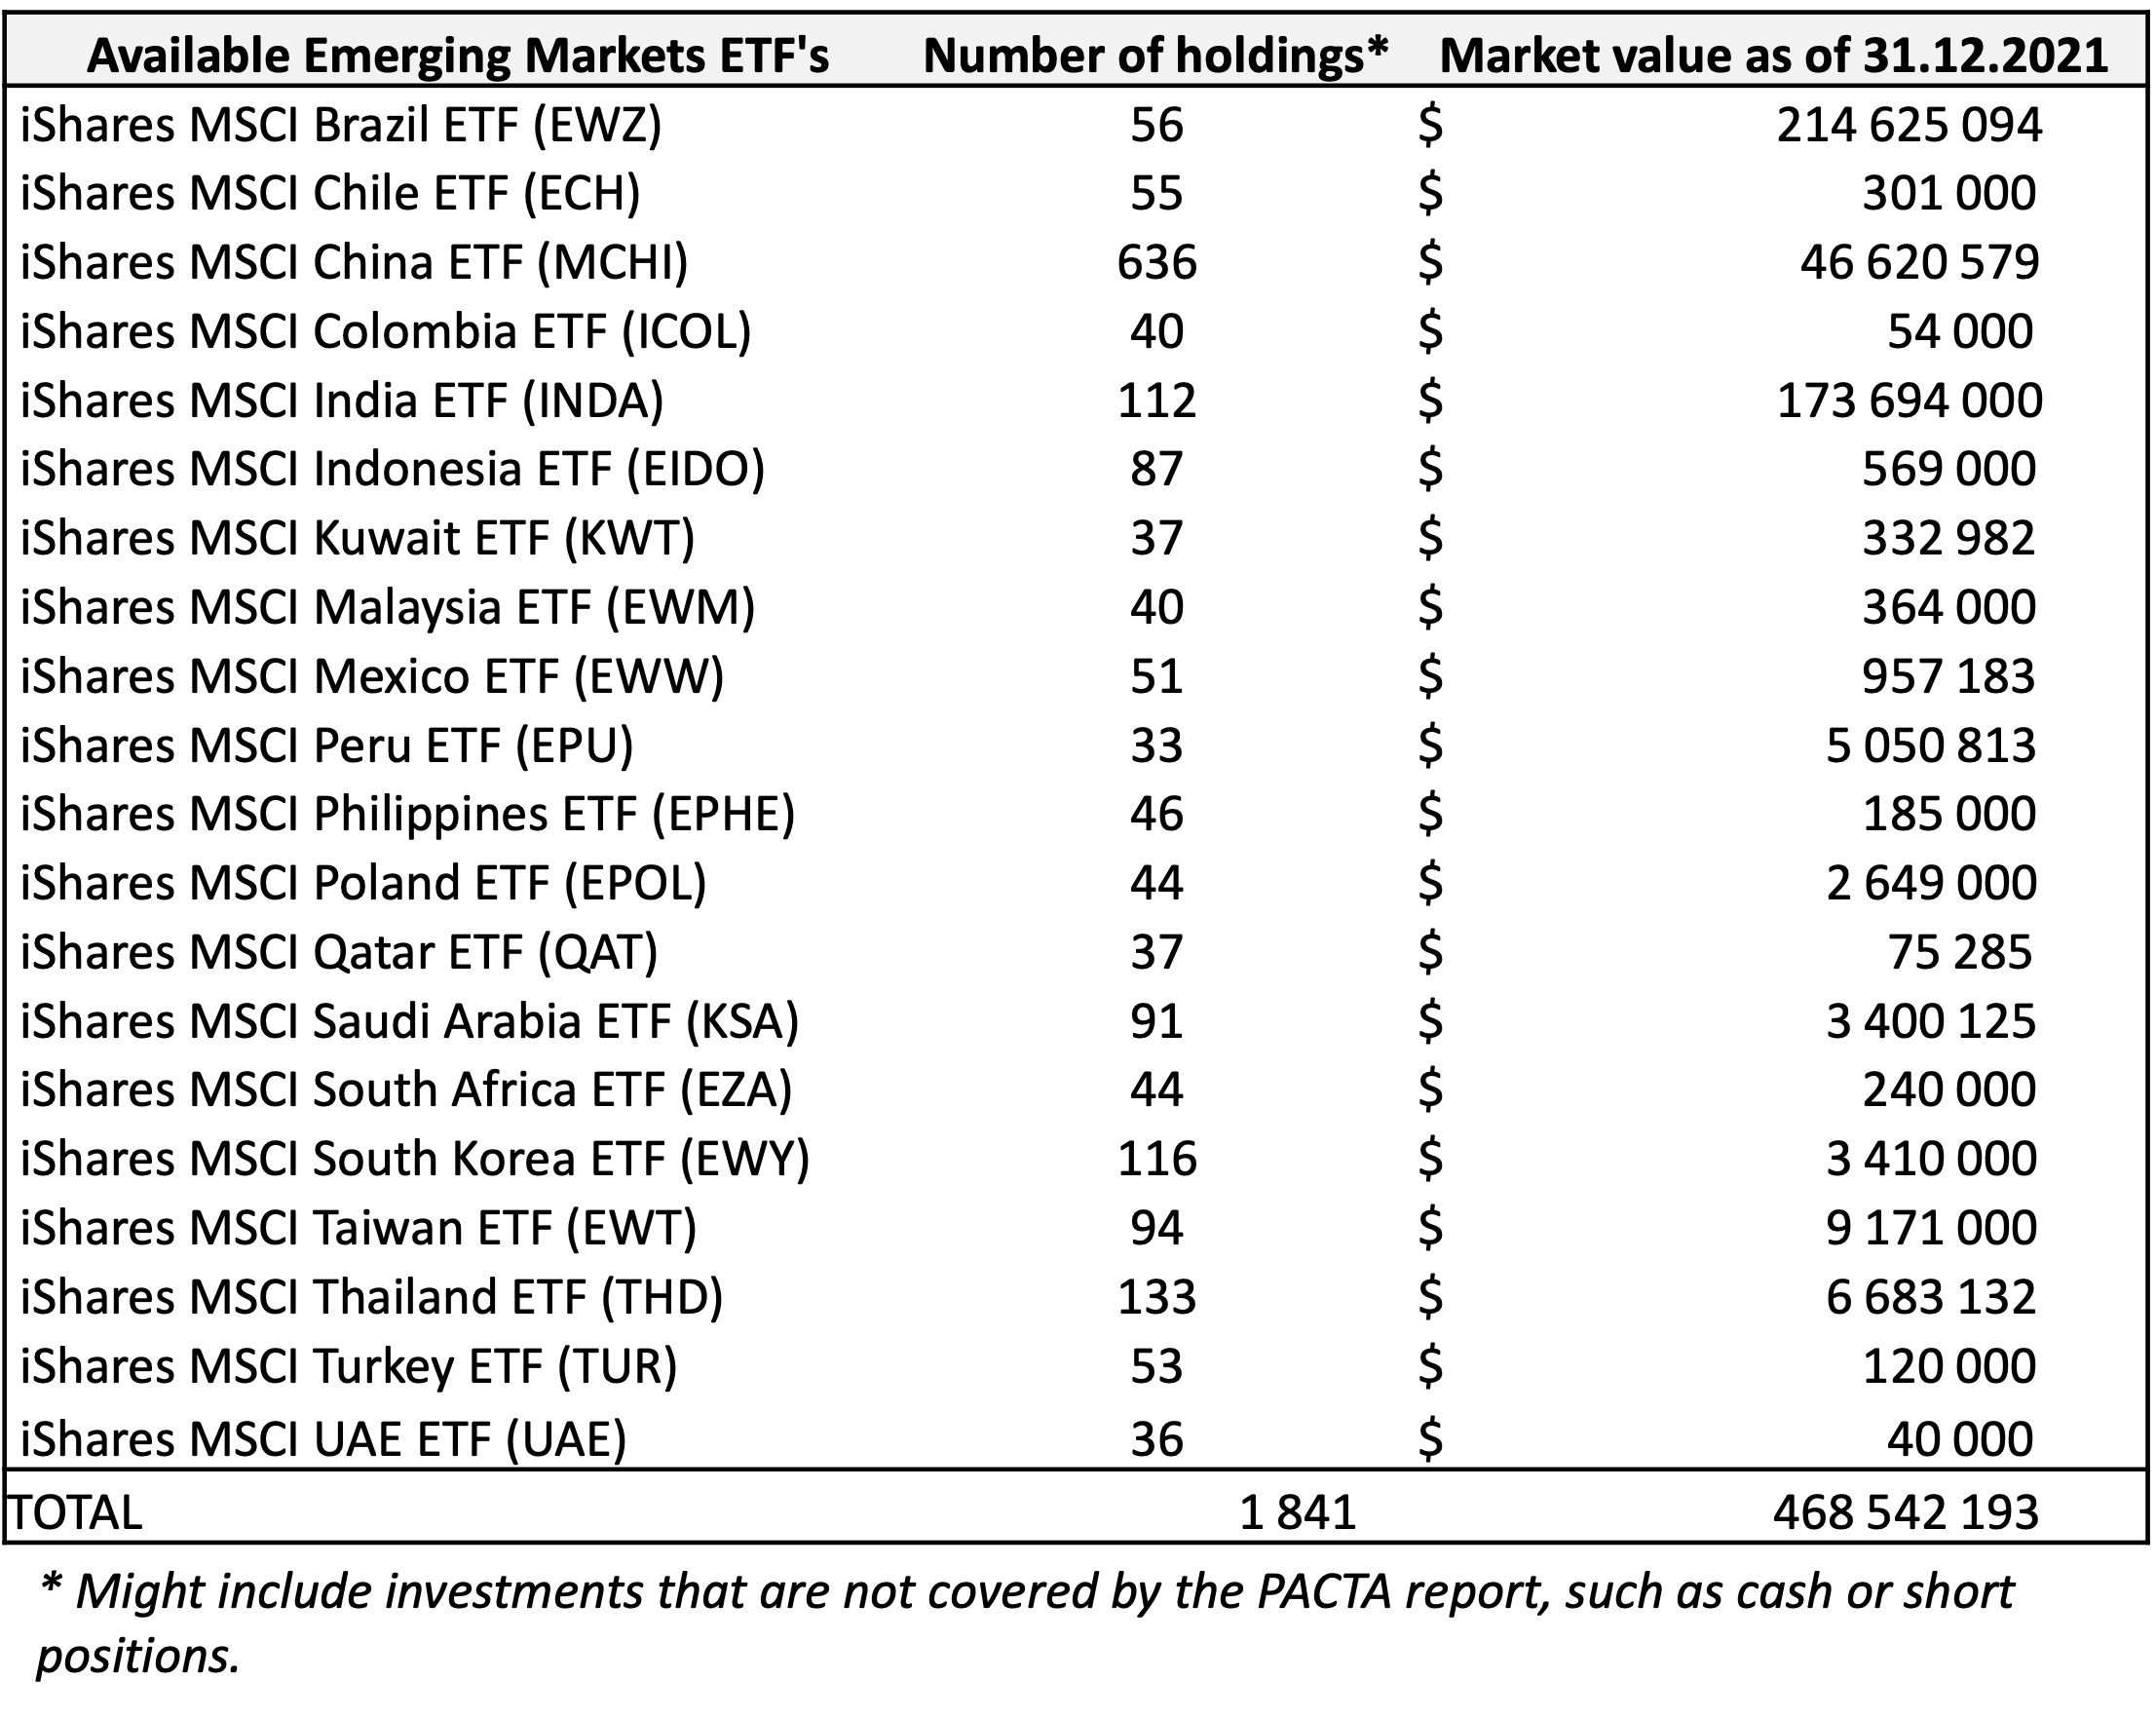 List of ETFs available for Emerging markets. For each of these ETFs, there is a PACTA report available, furthermore, there is a report that aggregates the portfolios of this set of ETFs.